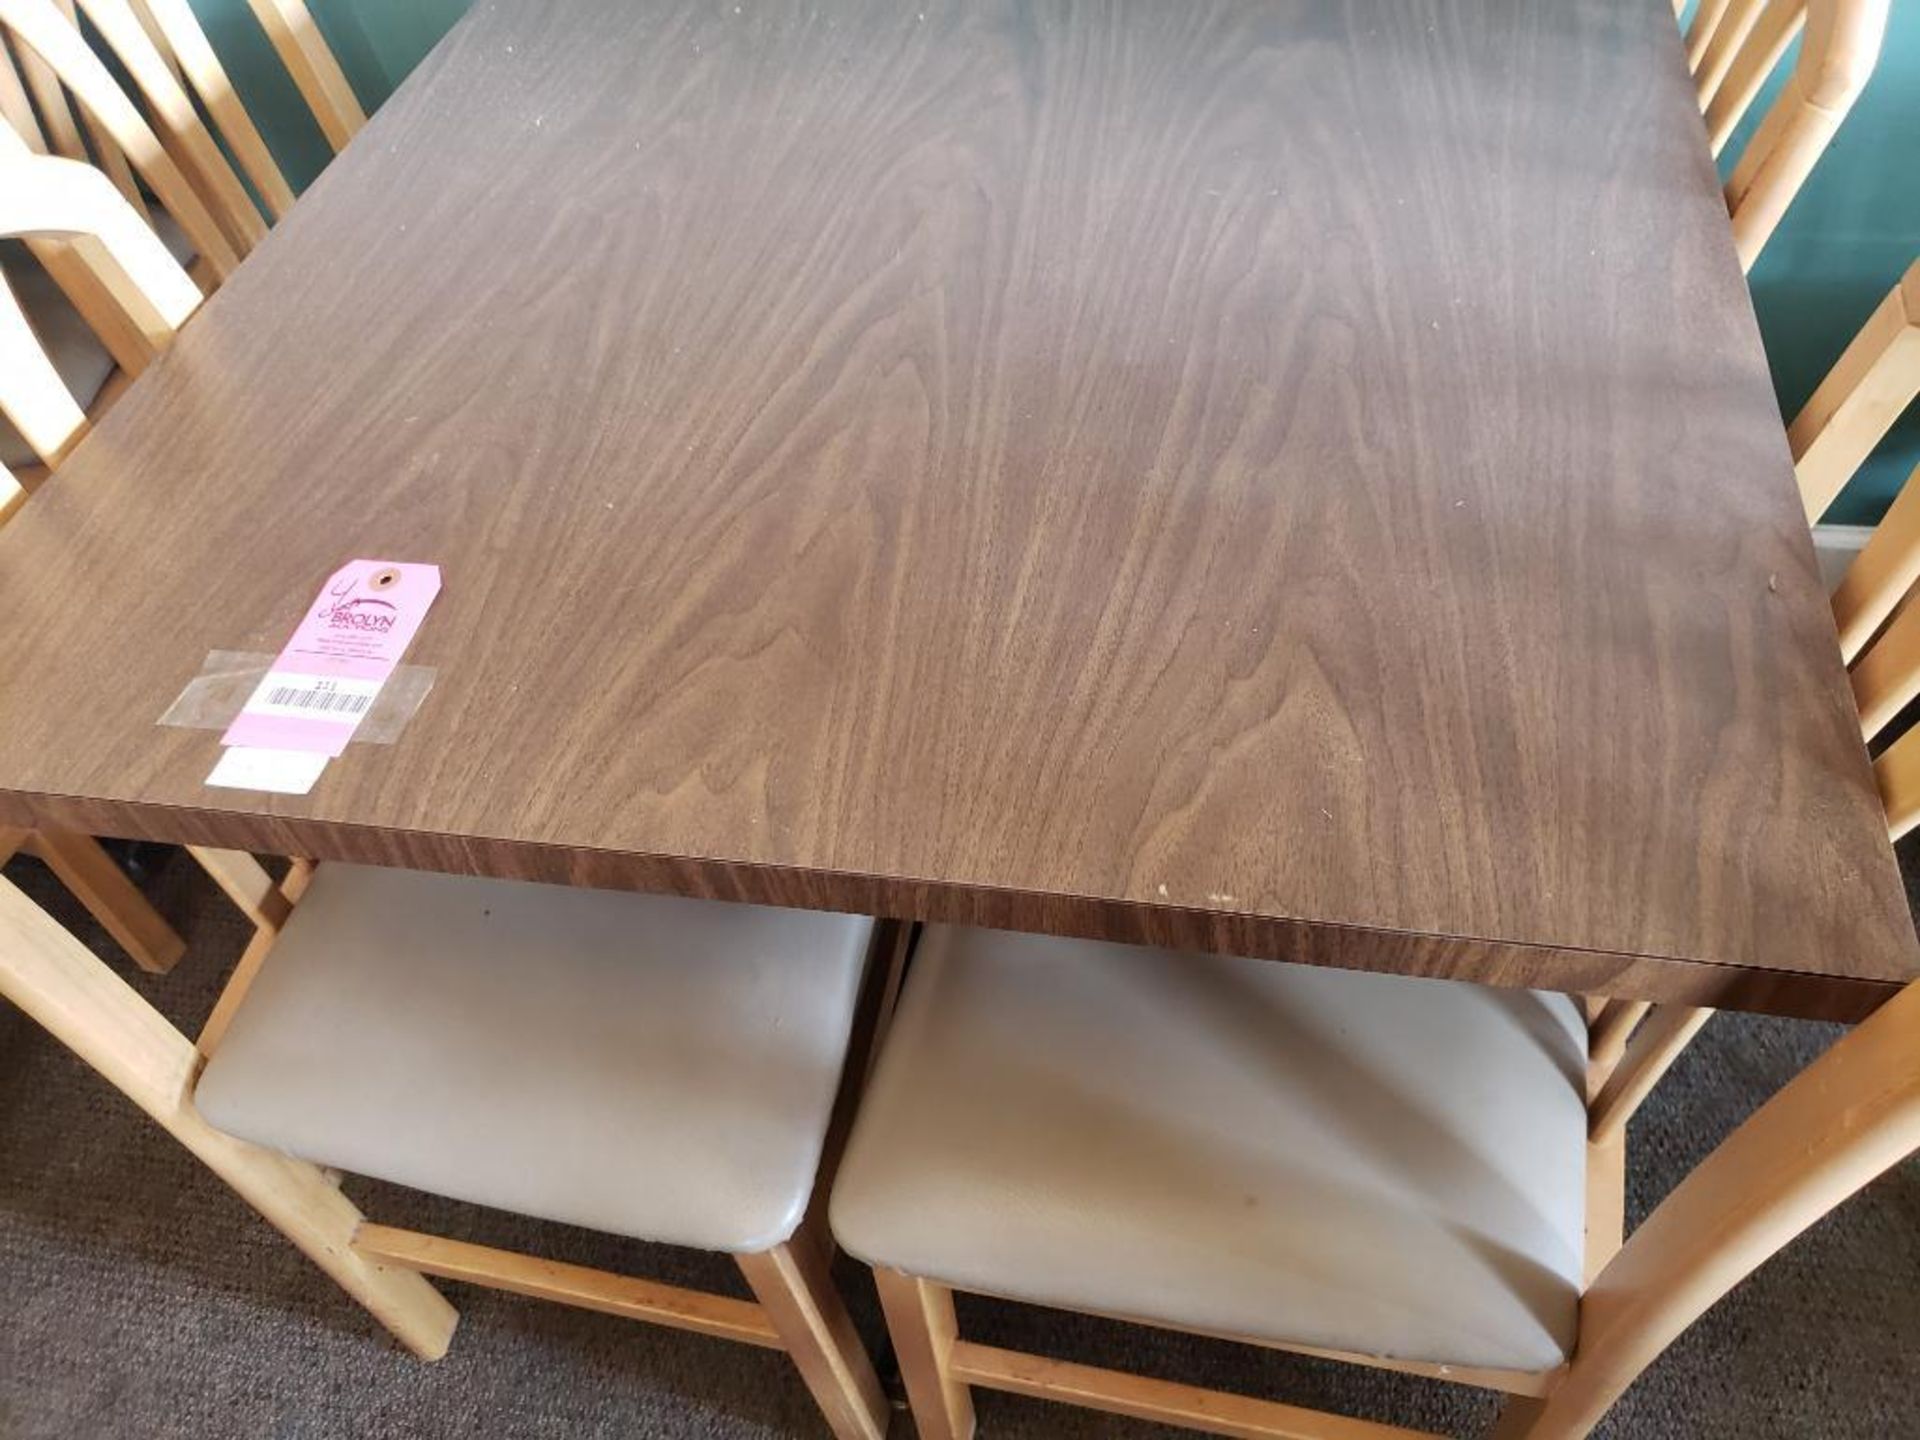 Table with 4 chairs. Table size 35in x 35in. - Image 2 of 4